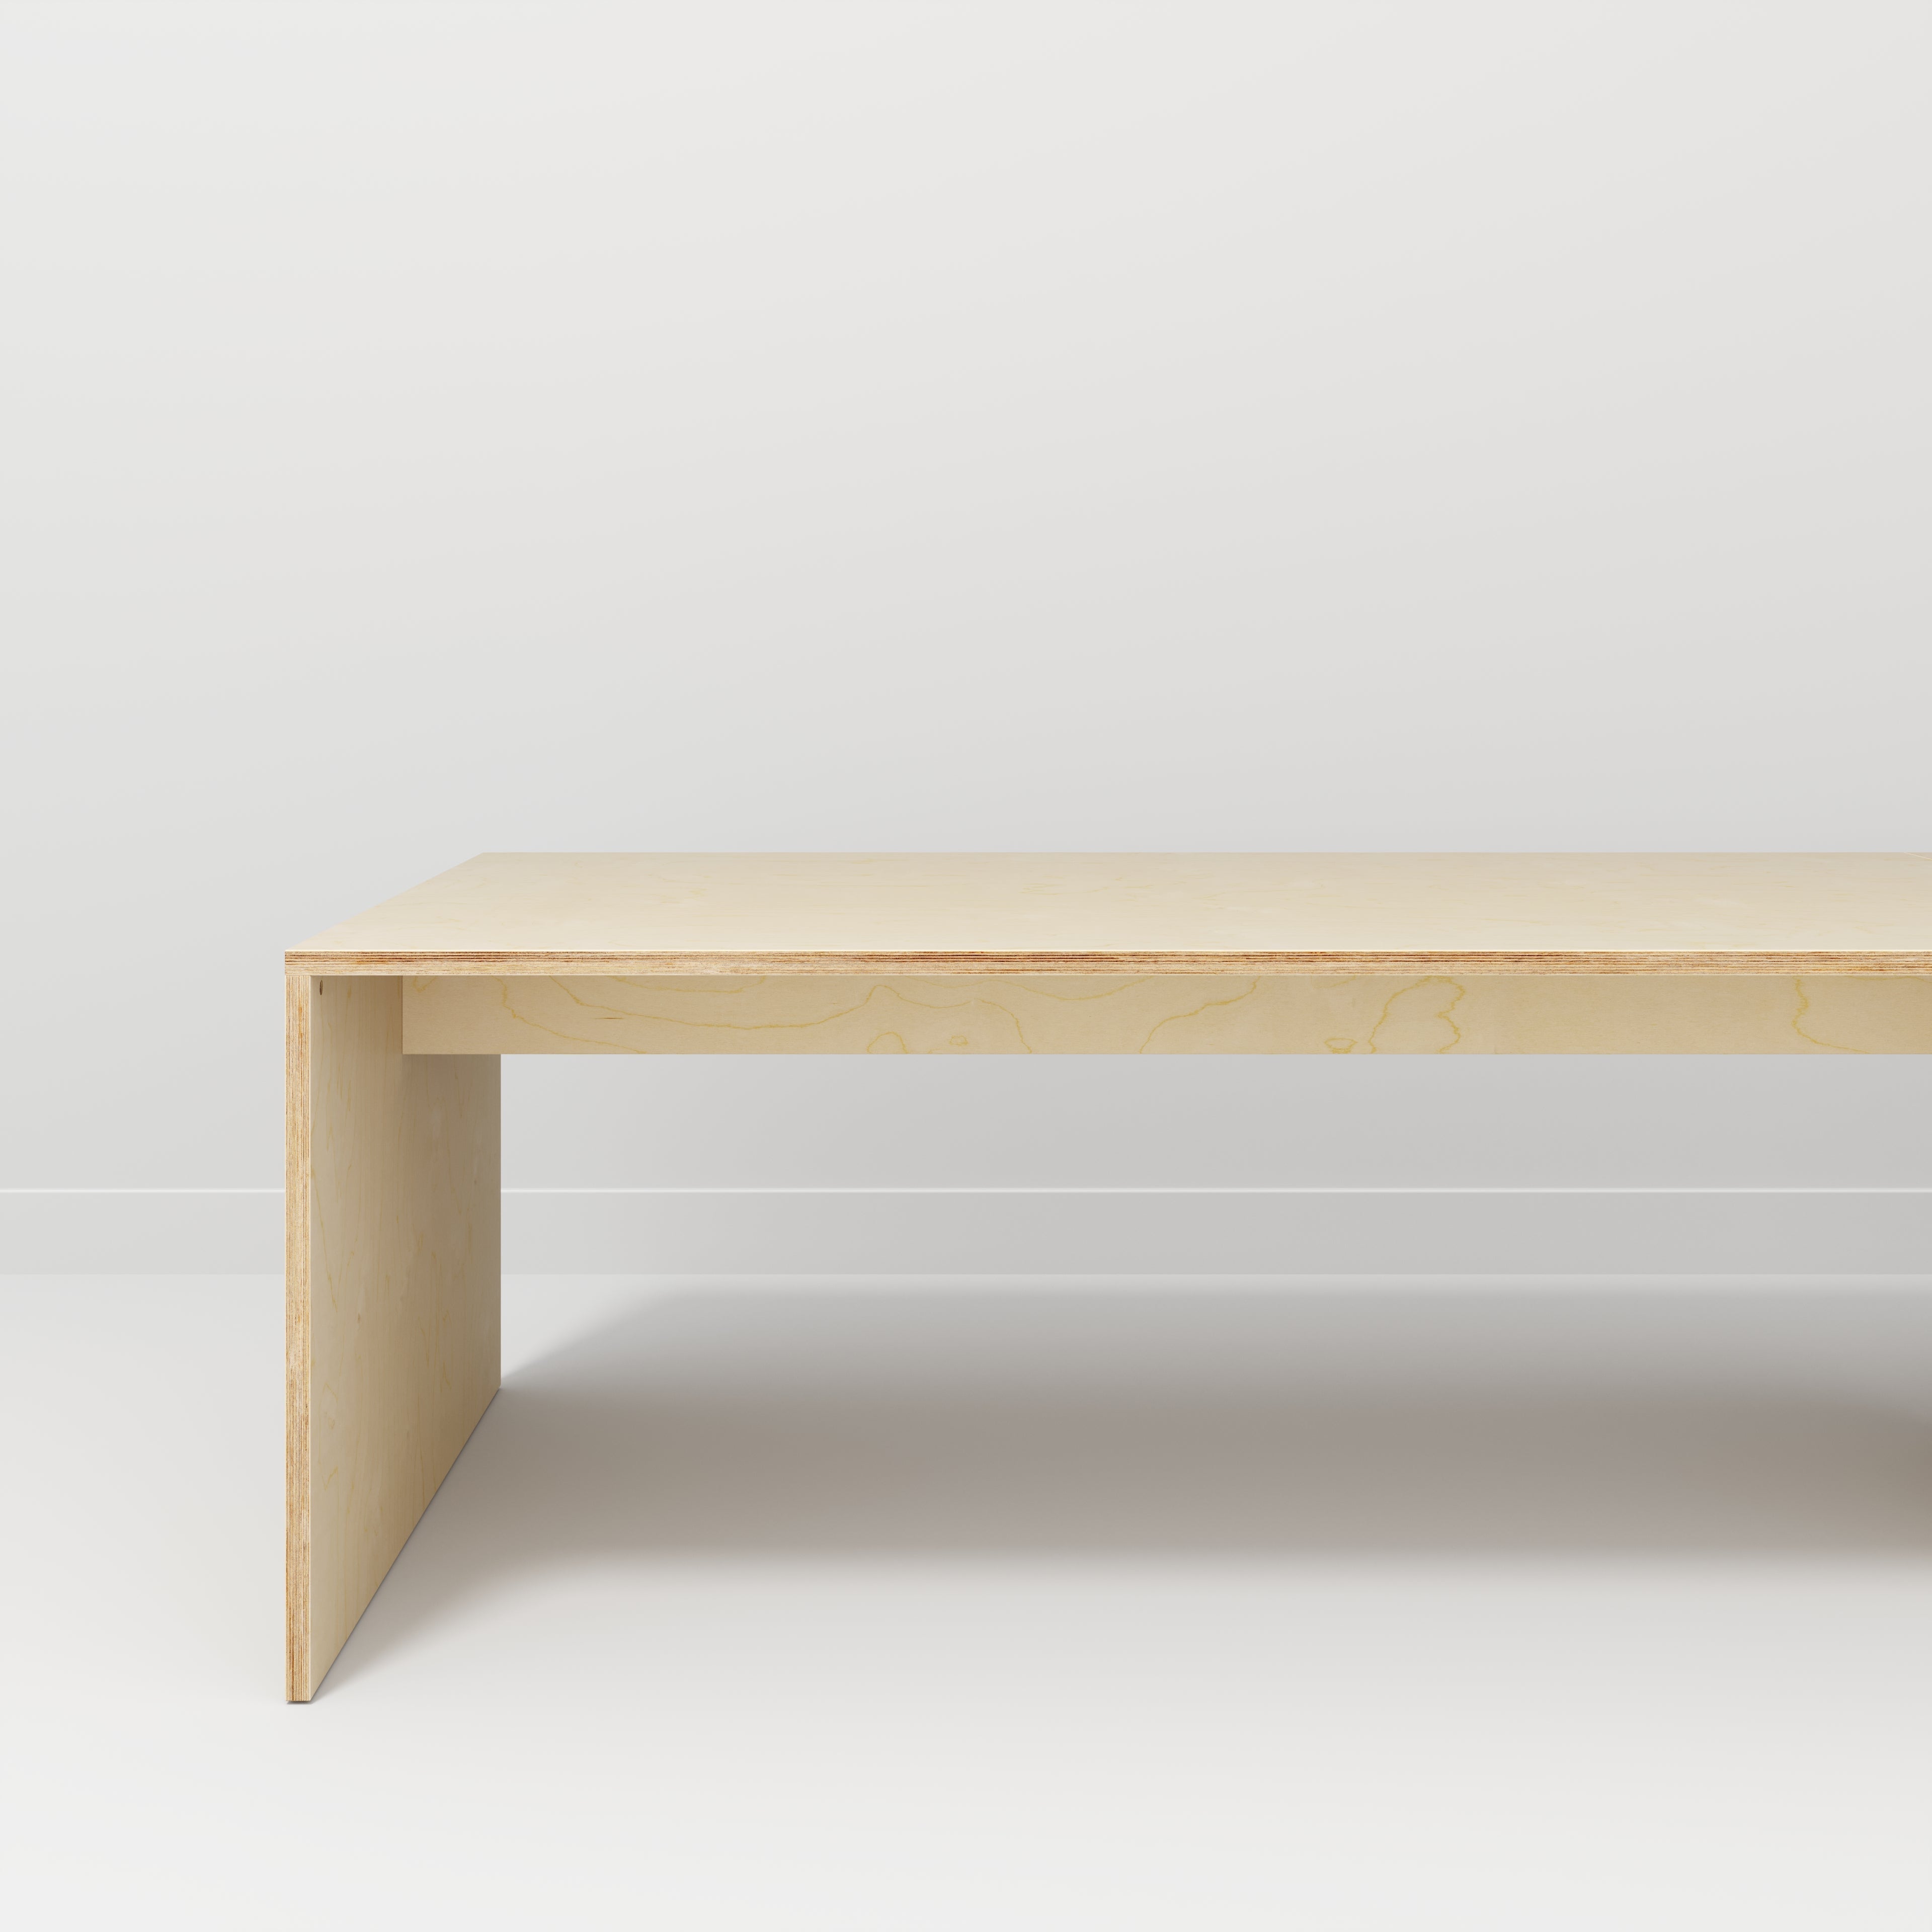 Table with Solid Sides - Plywood Birch - 5600(w) x 1000(d) x 735(h)